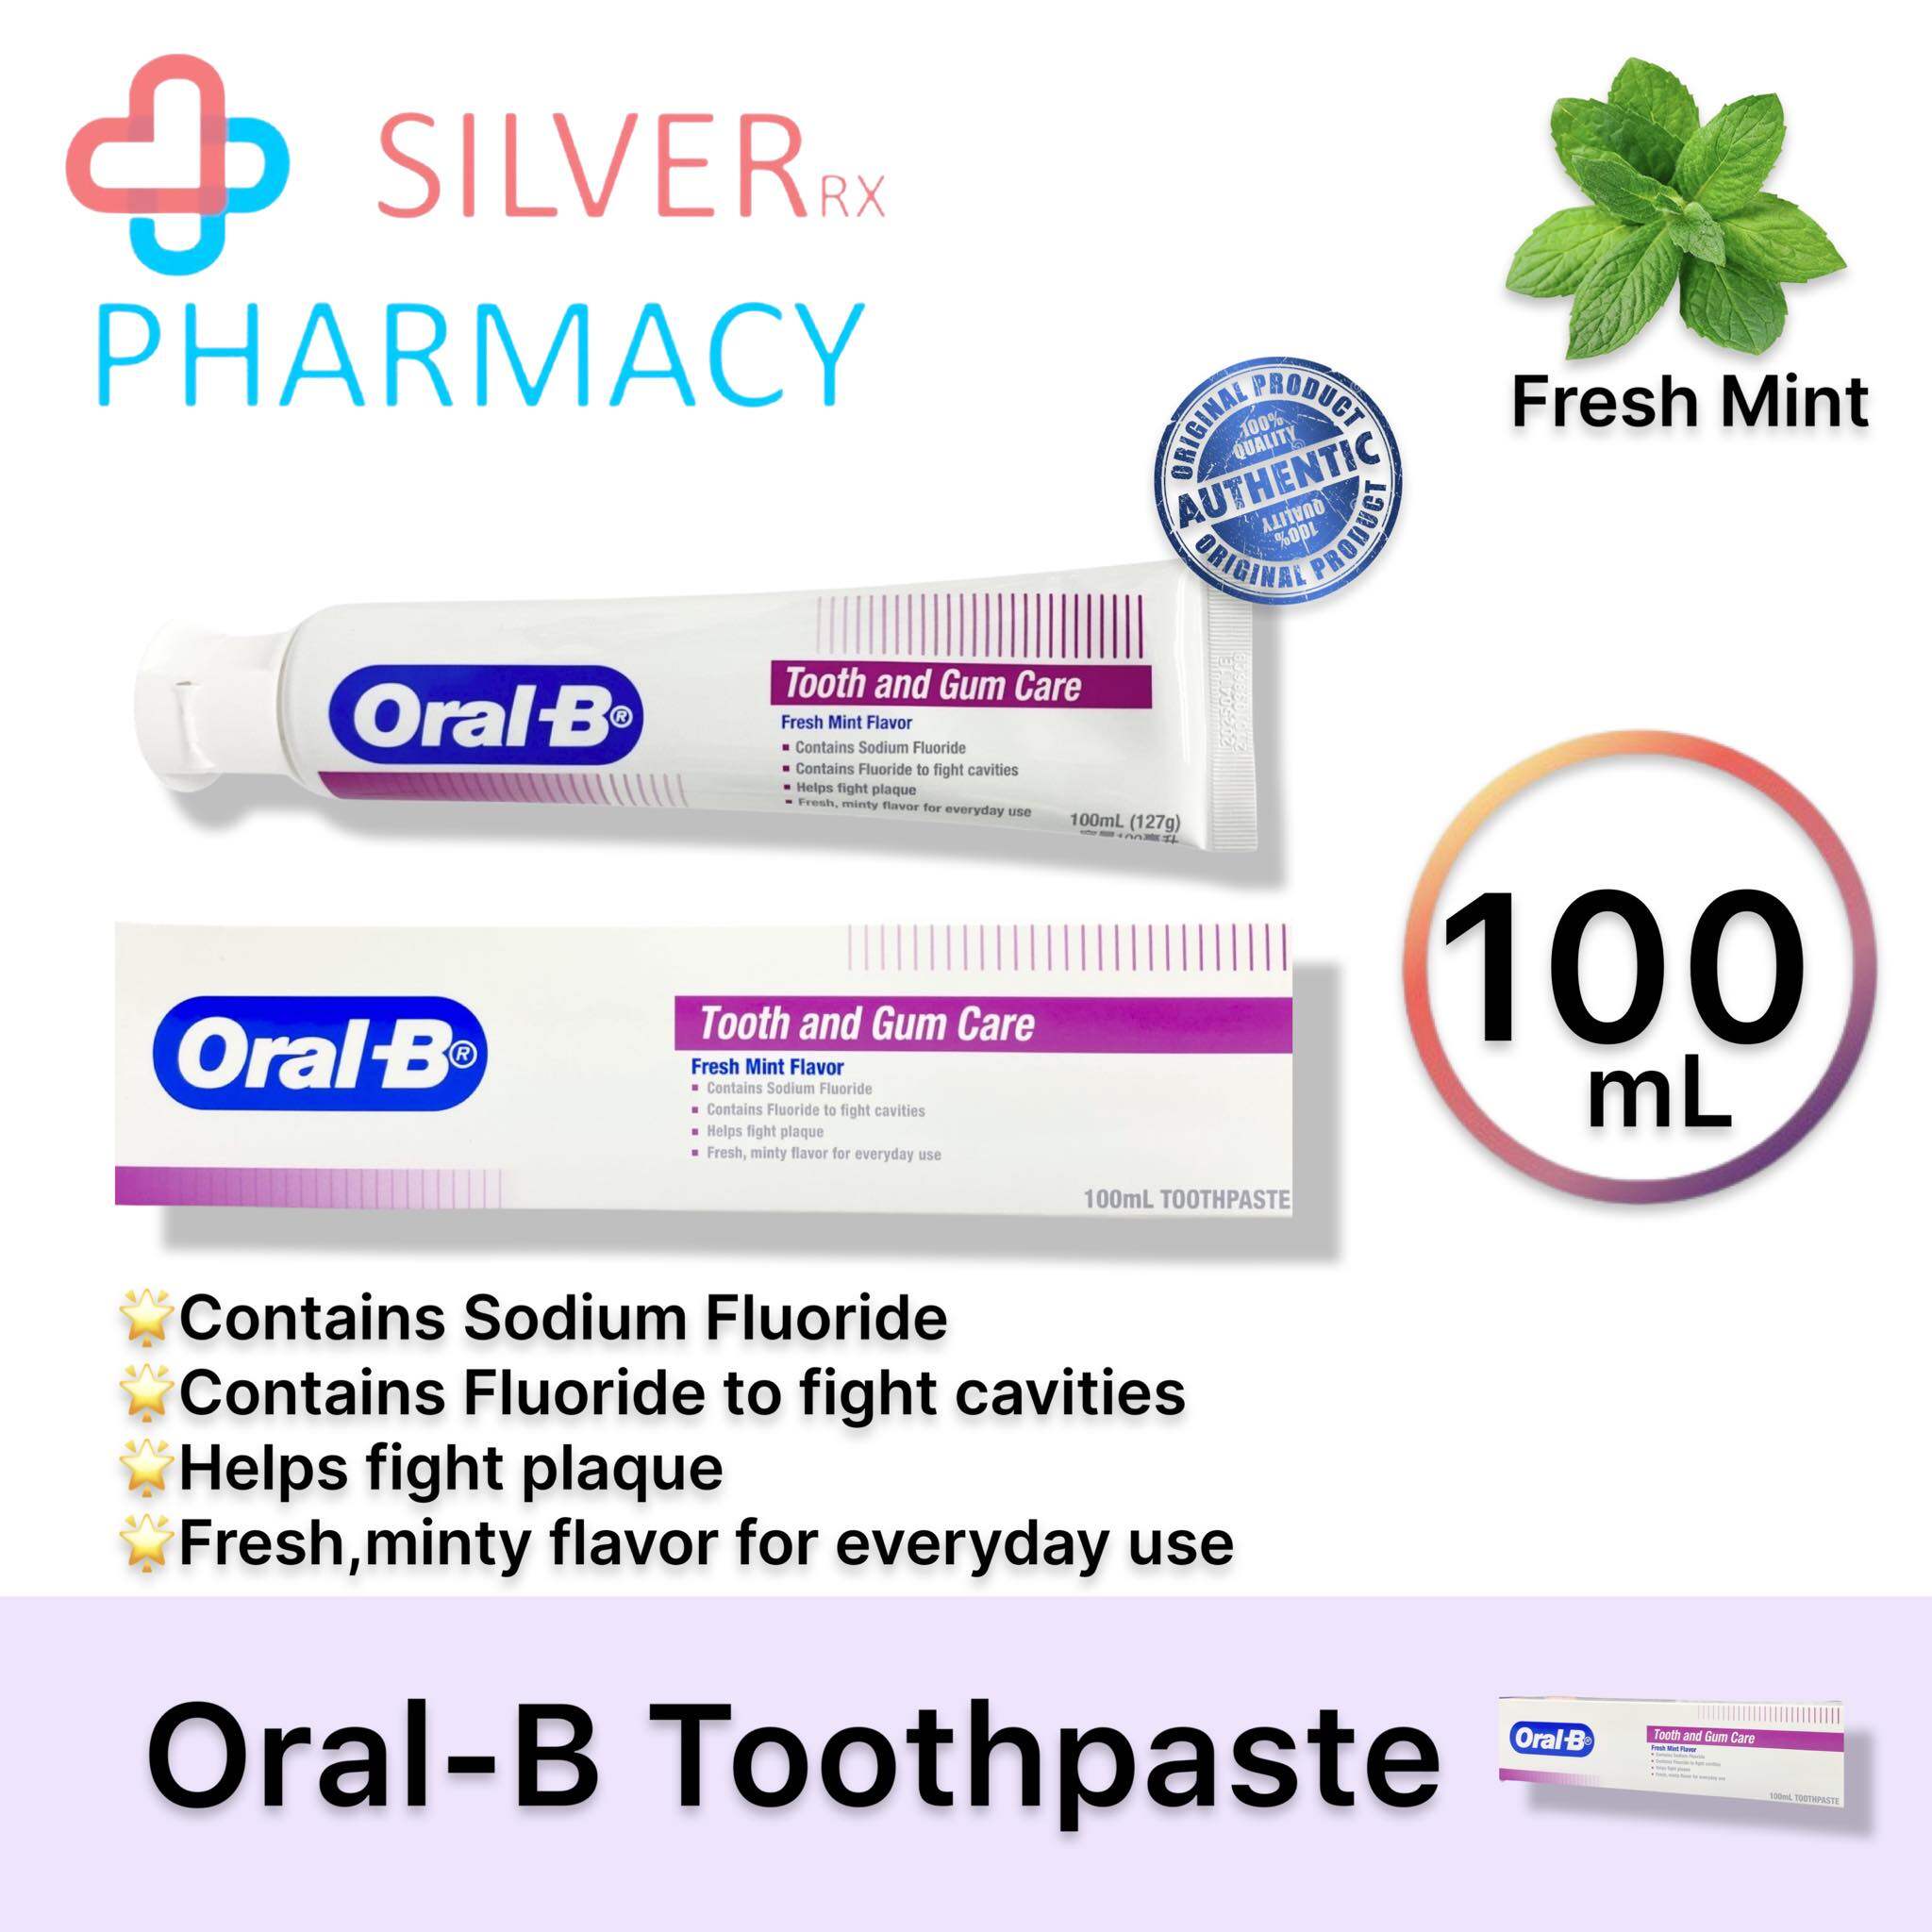 Oral-B Tooth and Gum Care Toothpaste 100ml [Fresh Mint Flavour]